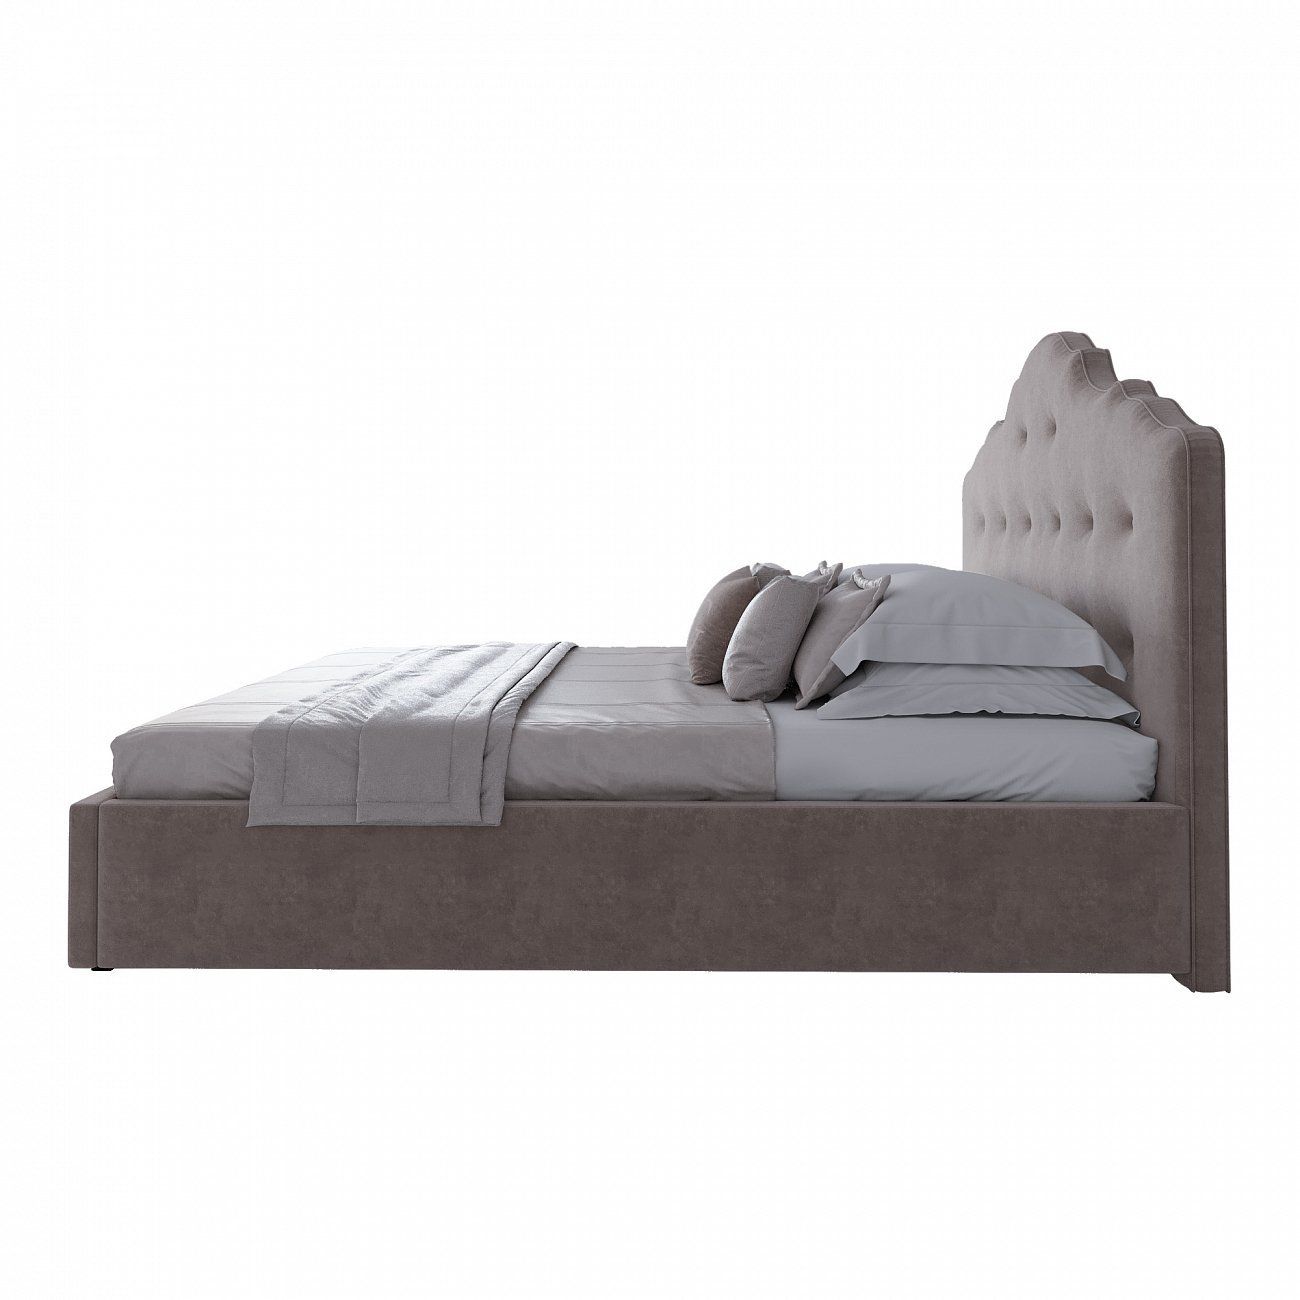 Euro 200x200 cm grey-brown Palace bed